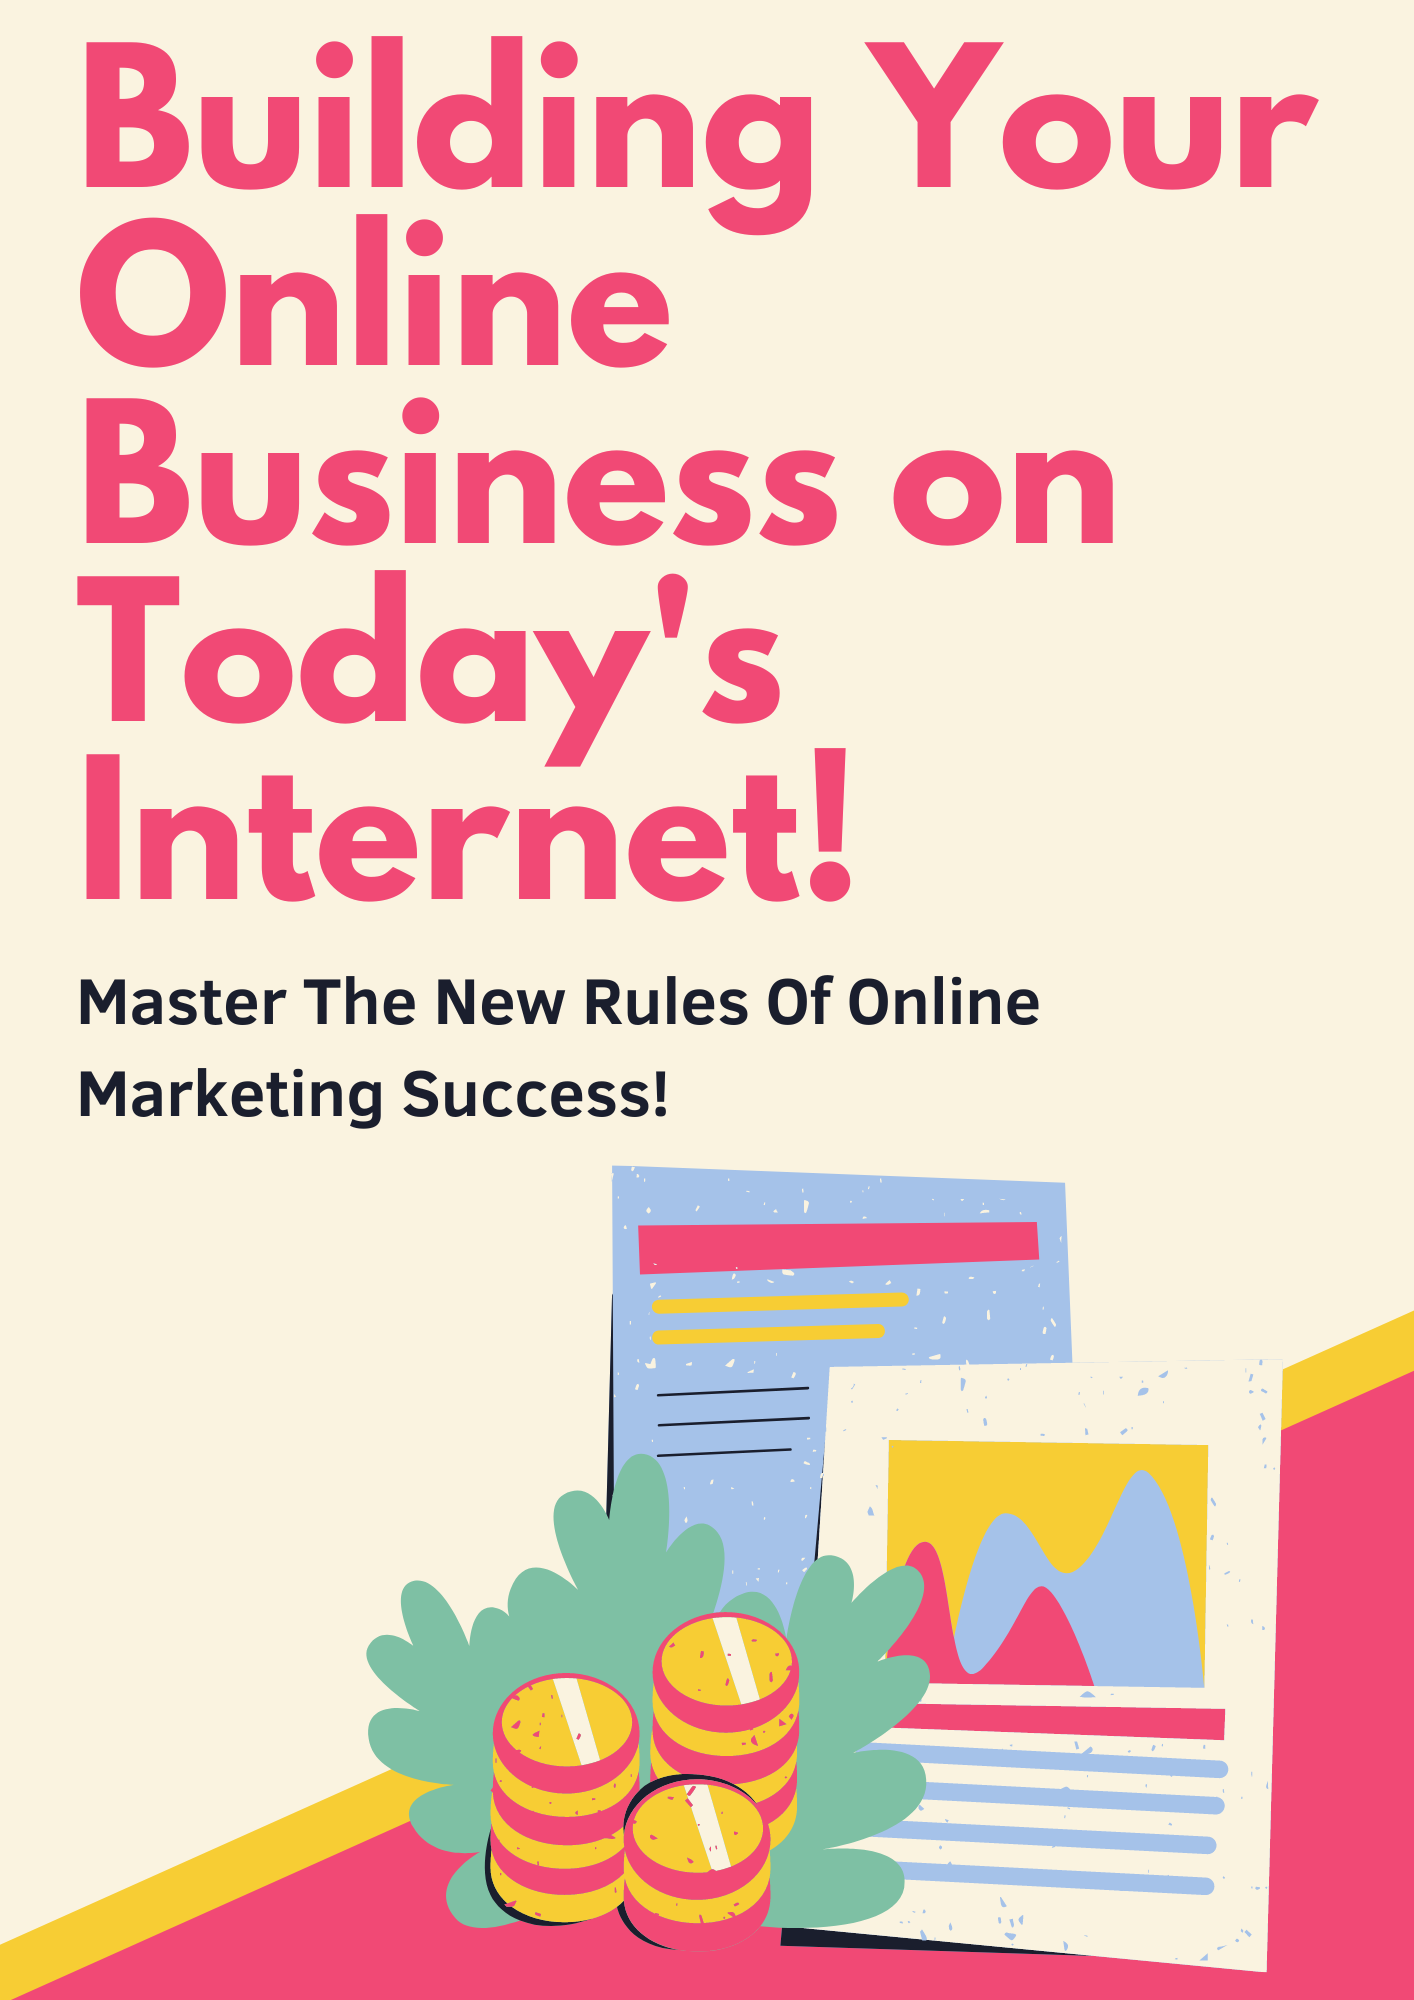 Building Your Online Business on Today's Internet